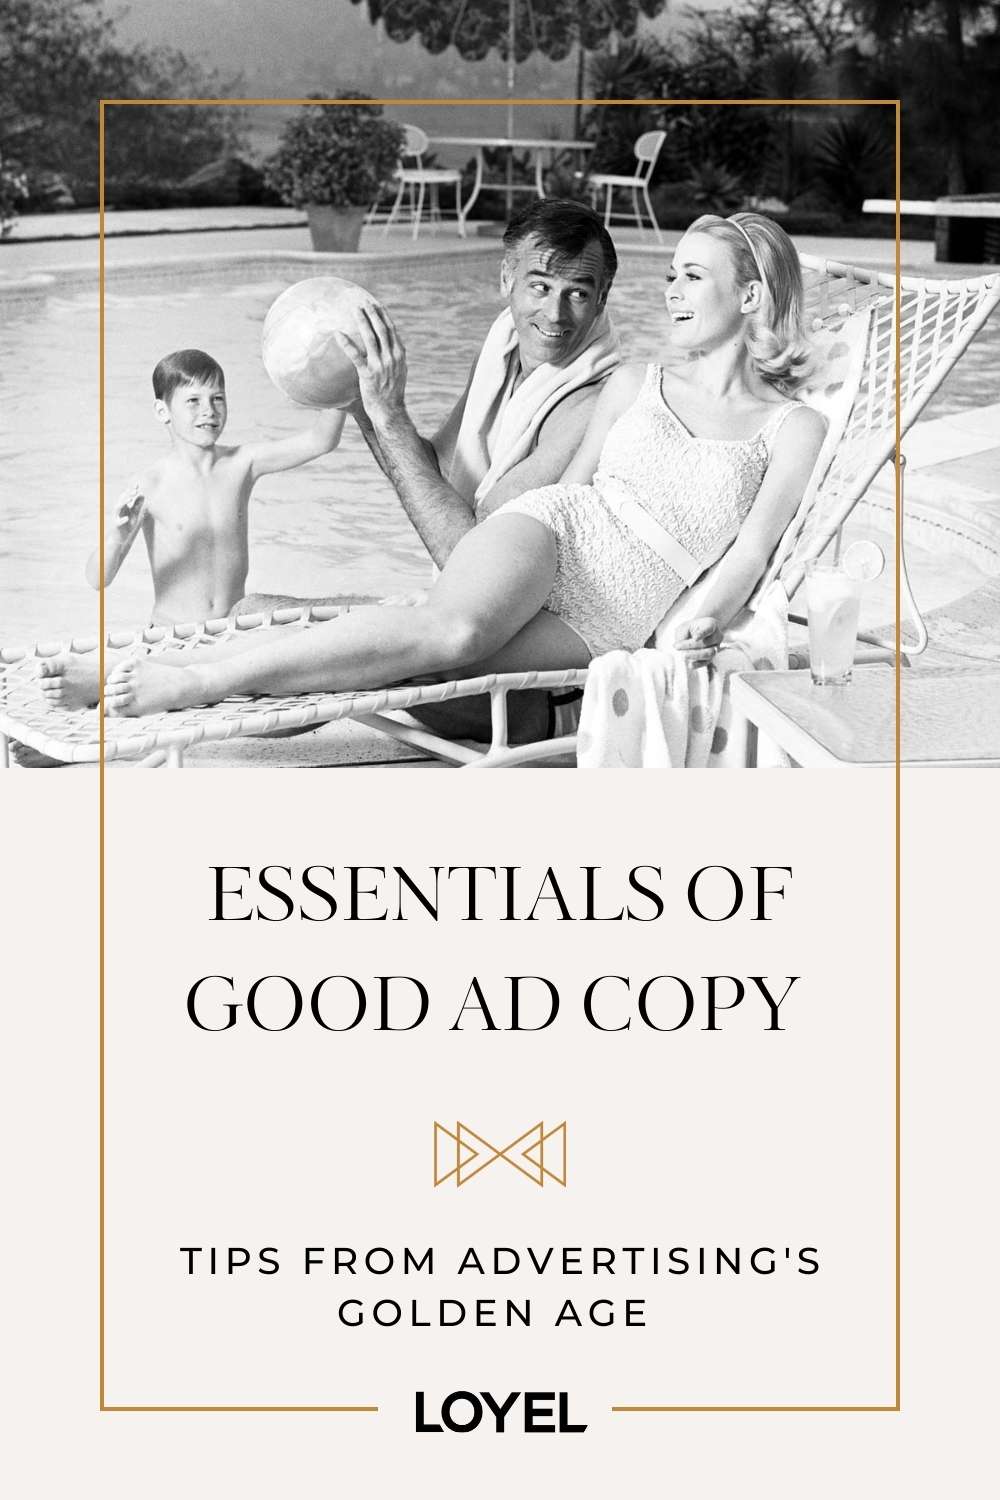 Essentials Good Ad Copy Tips from Golden Age Advertising